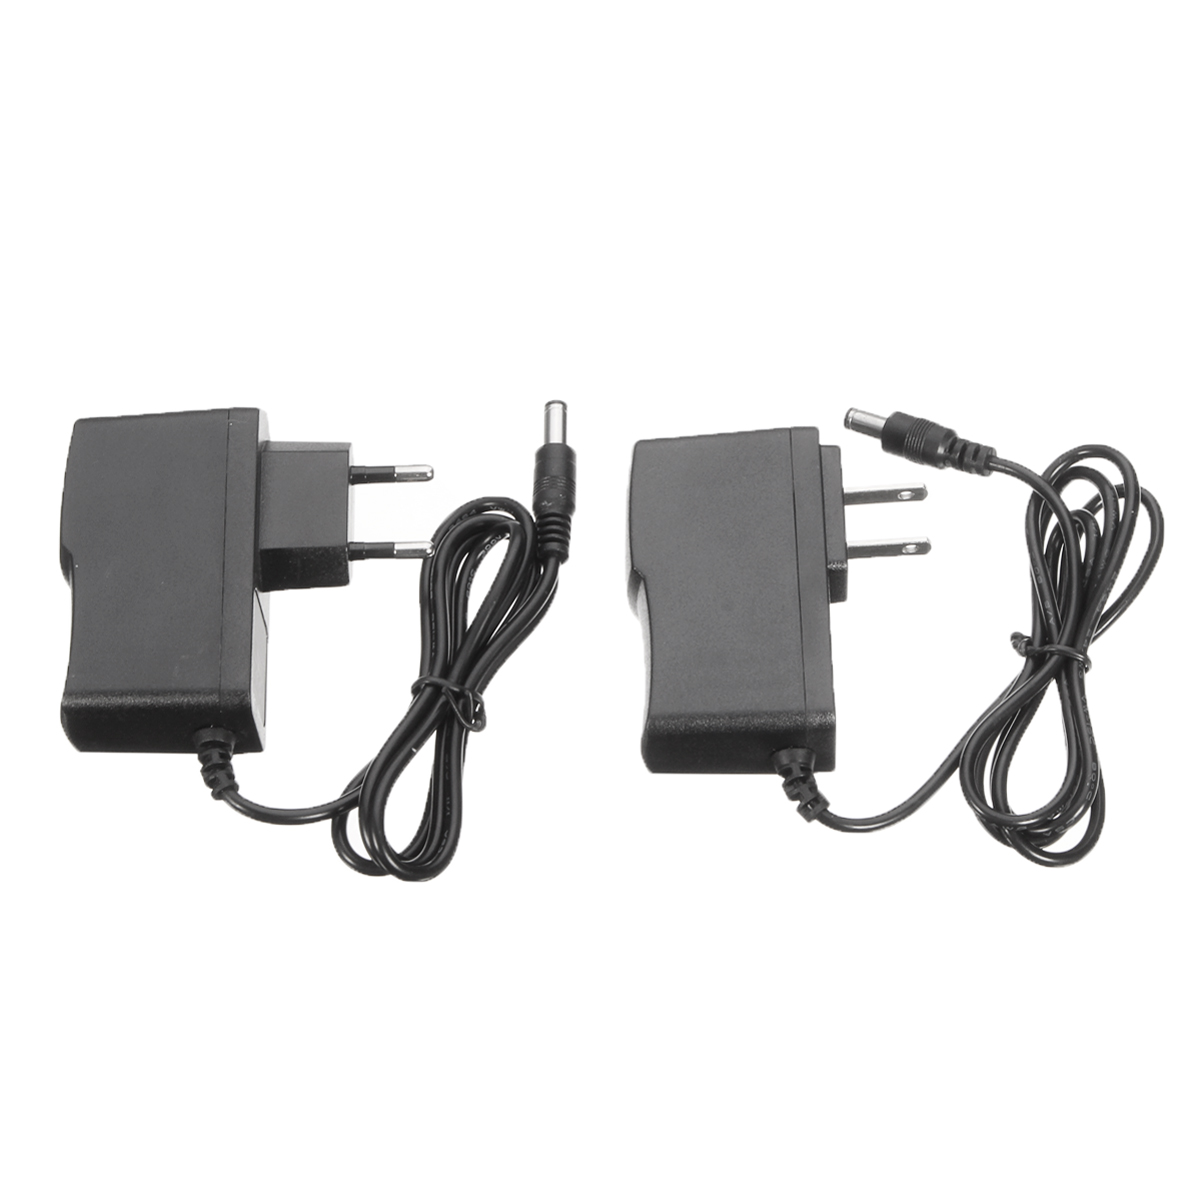 110-240V-USEU-Power-Supply-Charger-Adapter-Charger-For-Electric-Fruit-Potato-Vegetable-Skin-Peeler-1244288-4